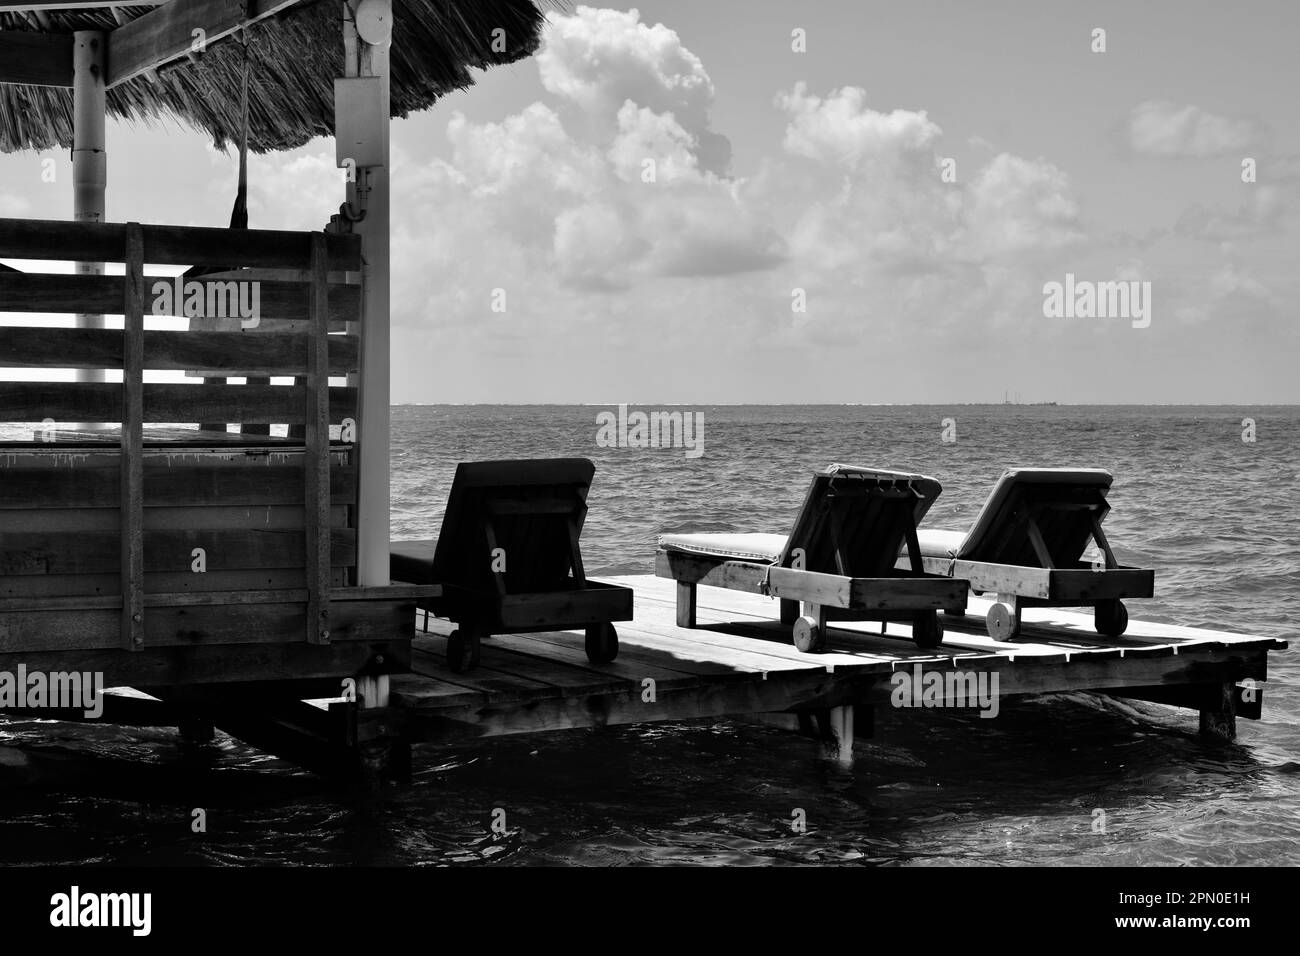 Lounge chairs on a dock, facing the sea, on a clear day in San Pedro, Ambergris Caye, Belize, Caribbean/Central America. Stock Photo